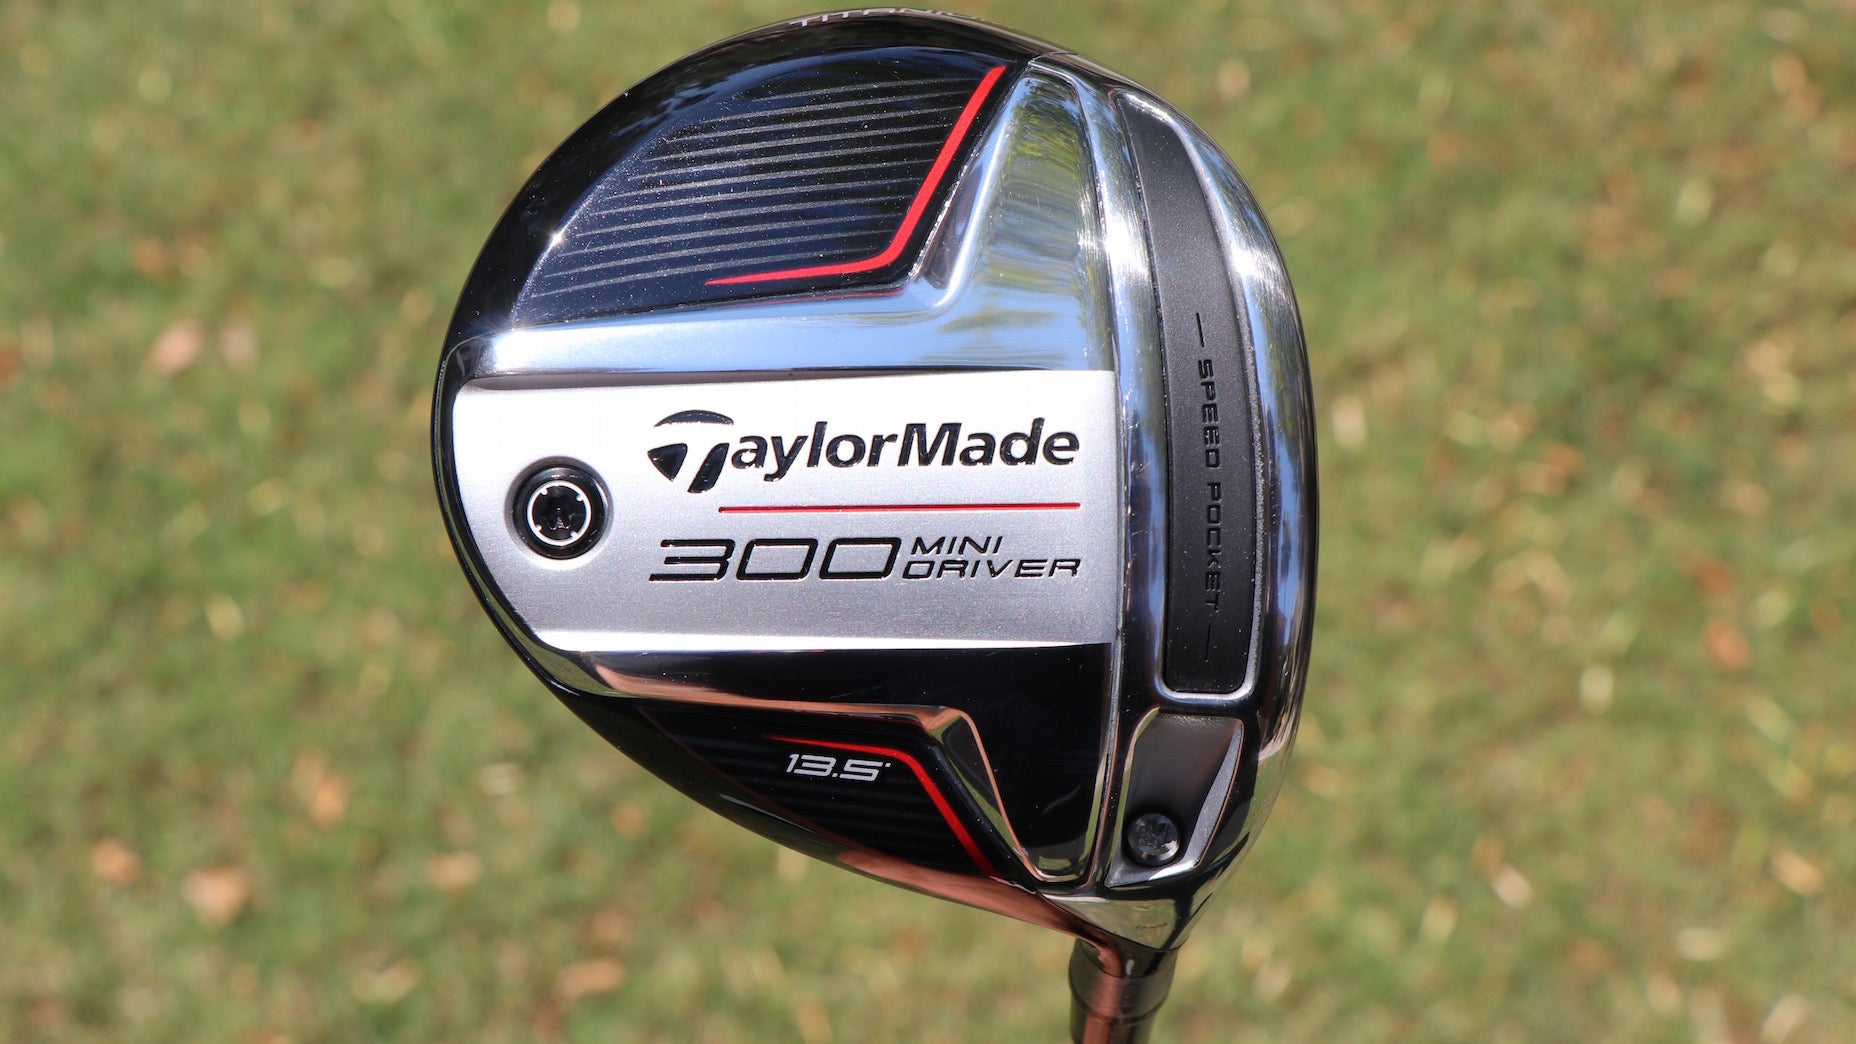 FIRST LOOK: TaylorMade officially launches its new 300 Mini Driver